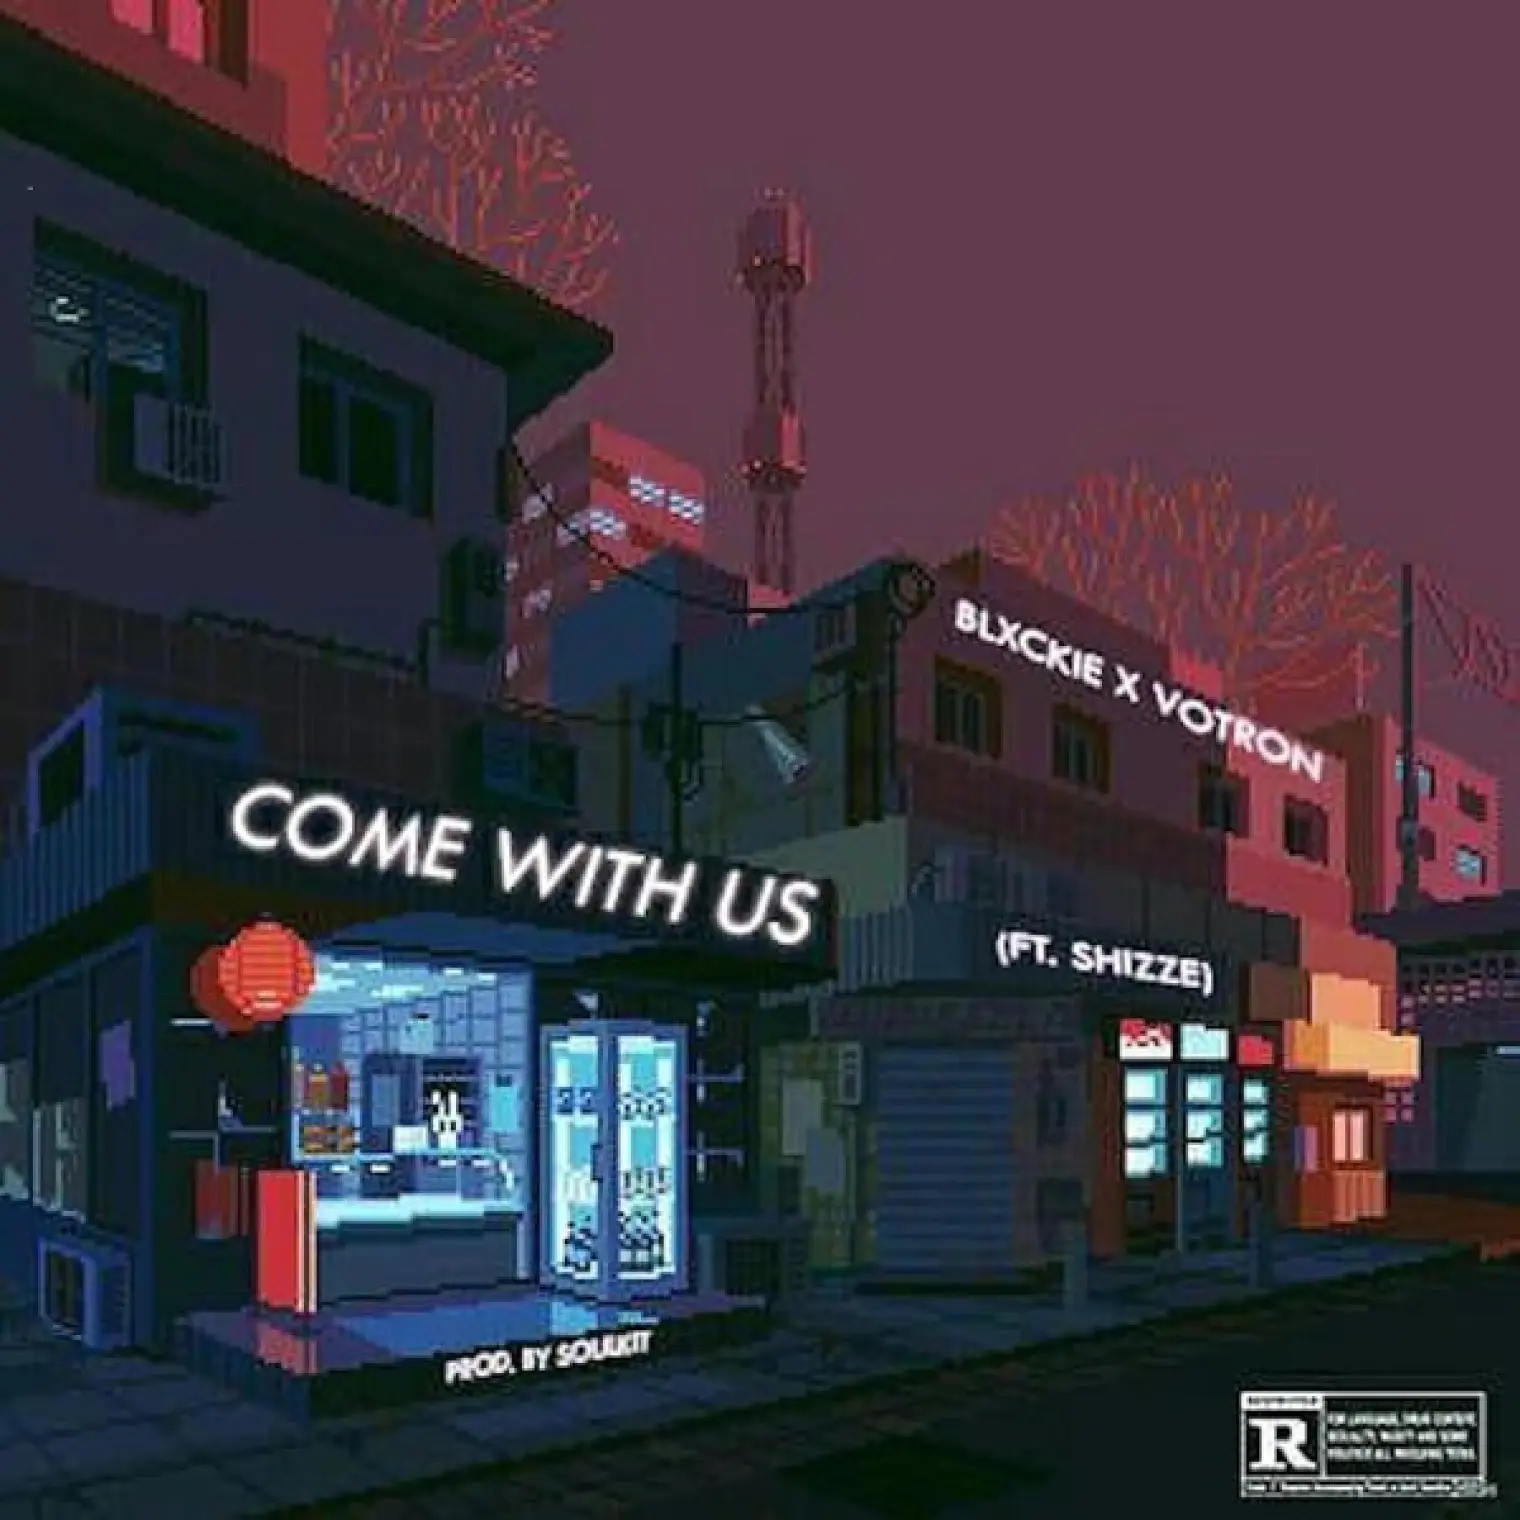 Come With Us -  Blxckie 